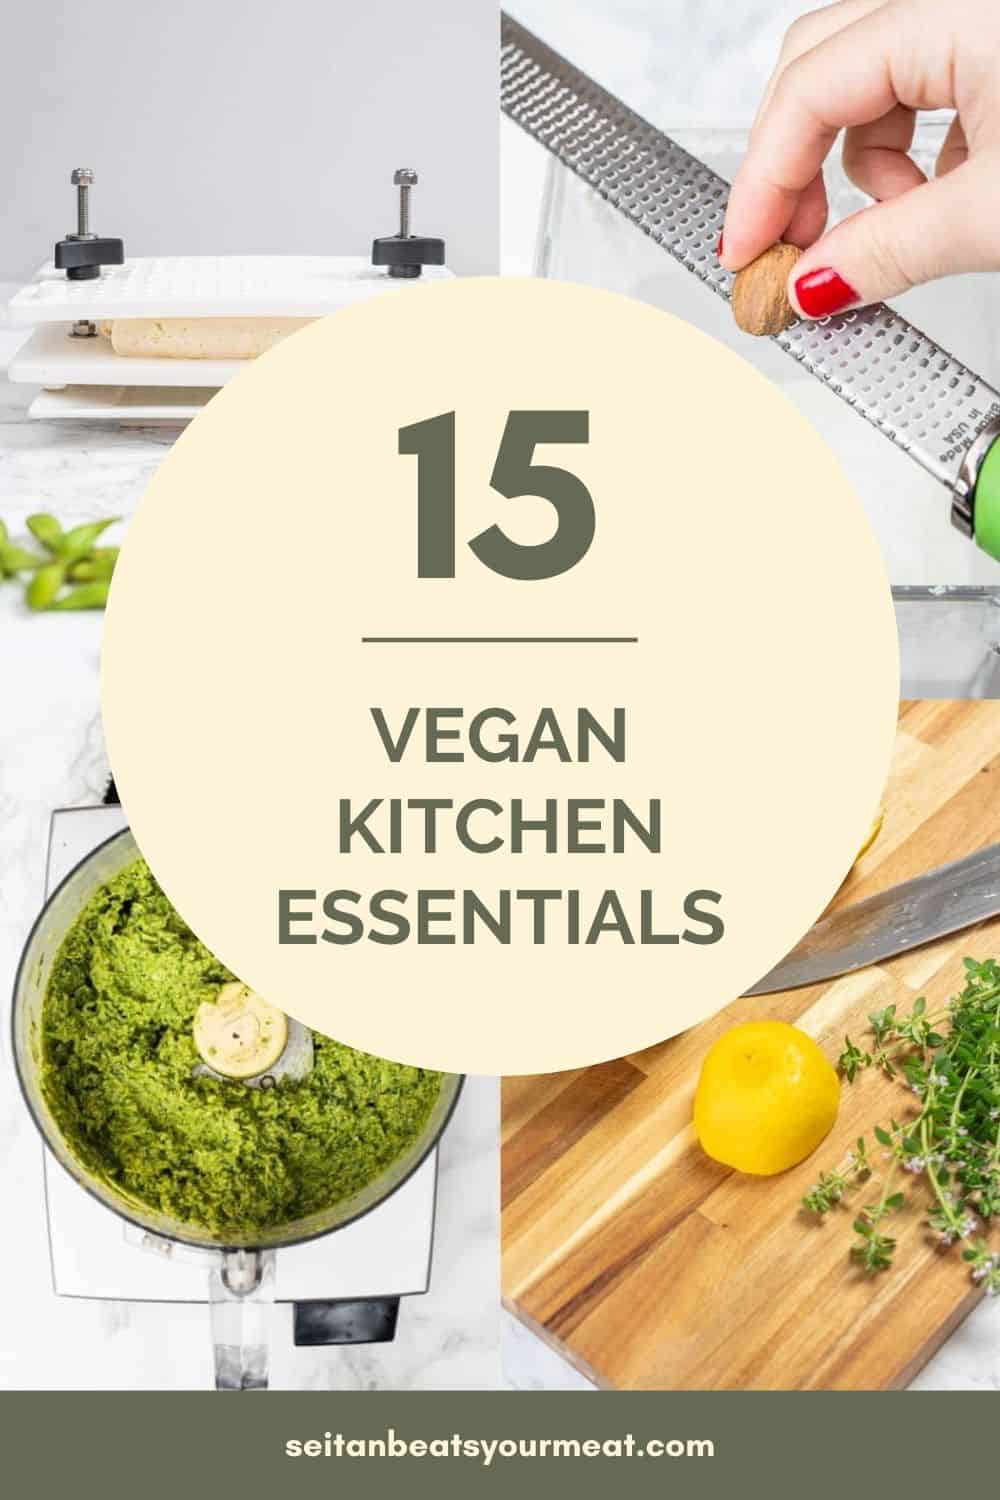 11 Essential Kitchen Tools For The Preparation of Raw And Vegan